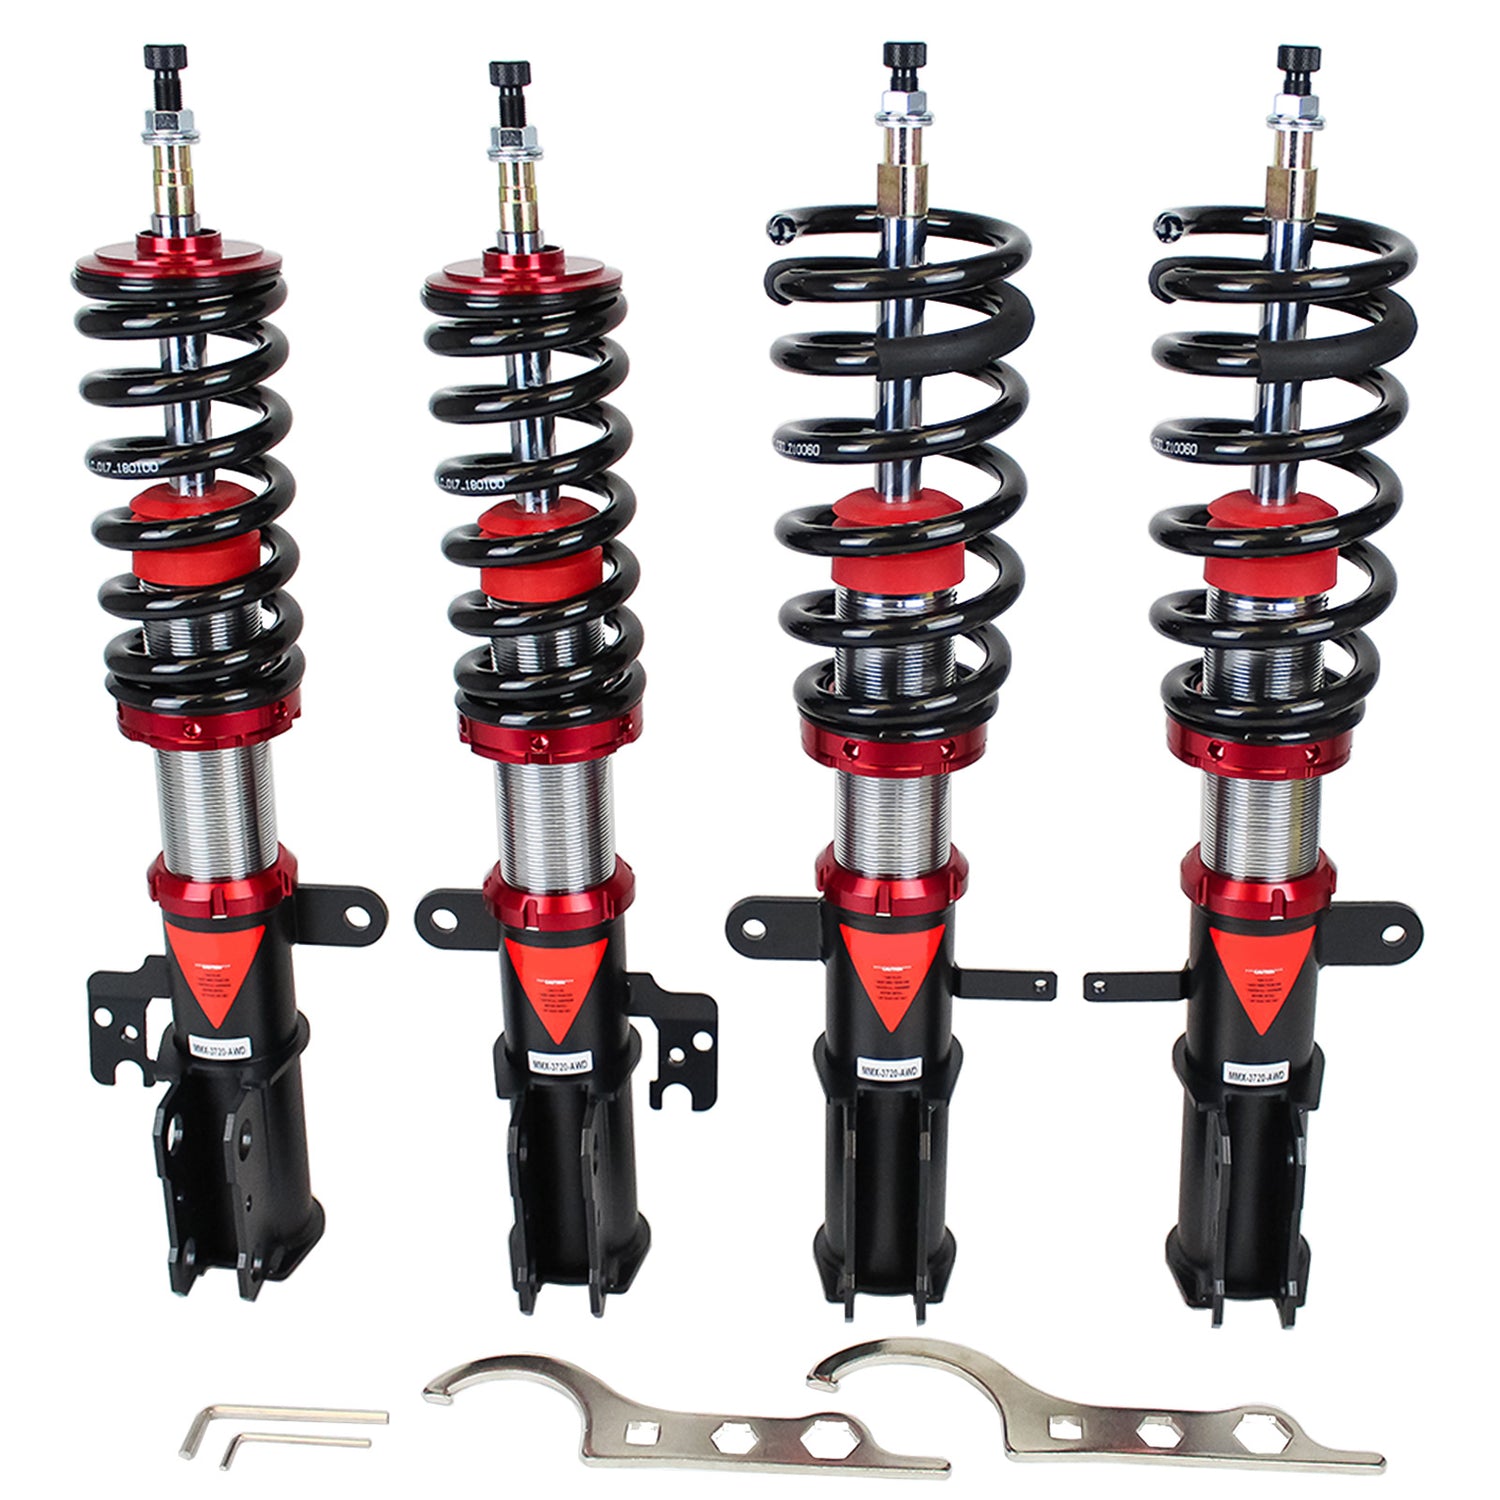 MMX3720-AWD MAXX Coilovers Lowering Kit, Fully Adjustable, Ride Height, 40 Clicks Rebound Settings, Lexus RX330/RX350(XU30) 04-09(AWD)